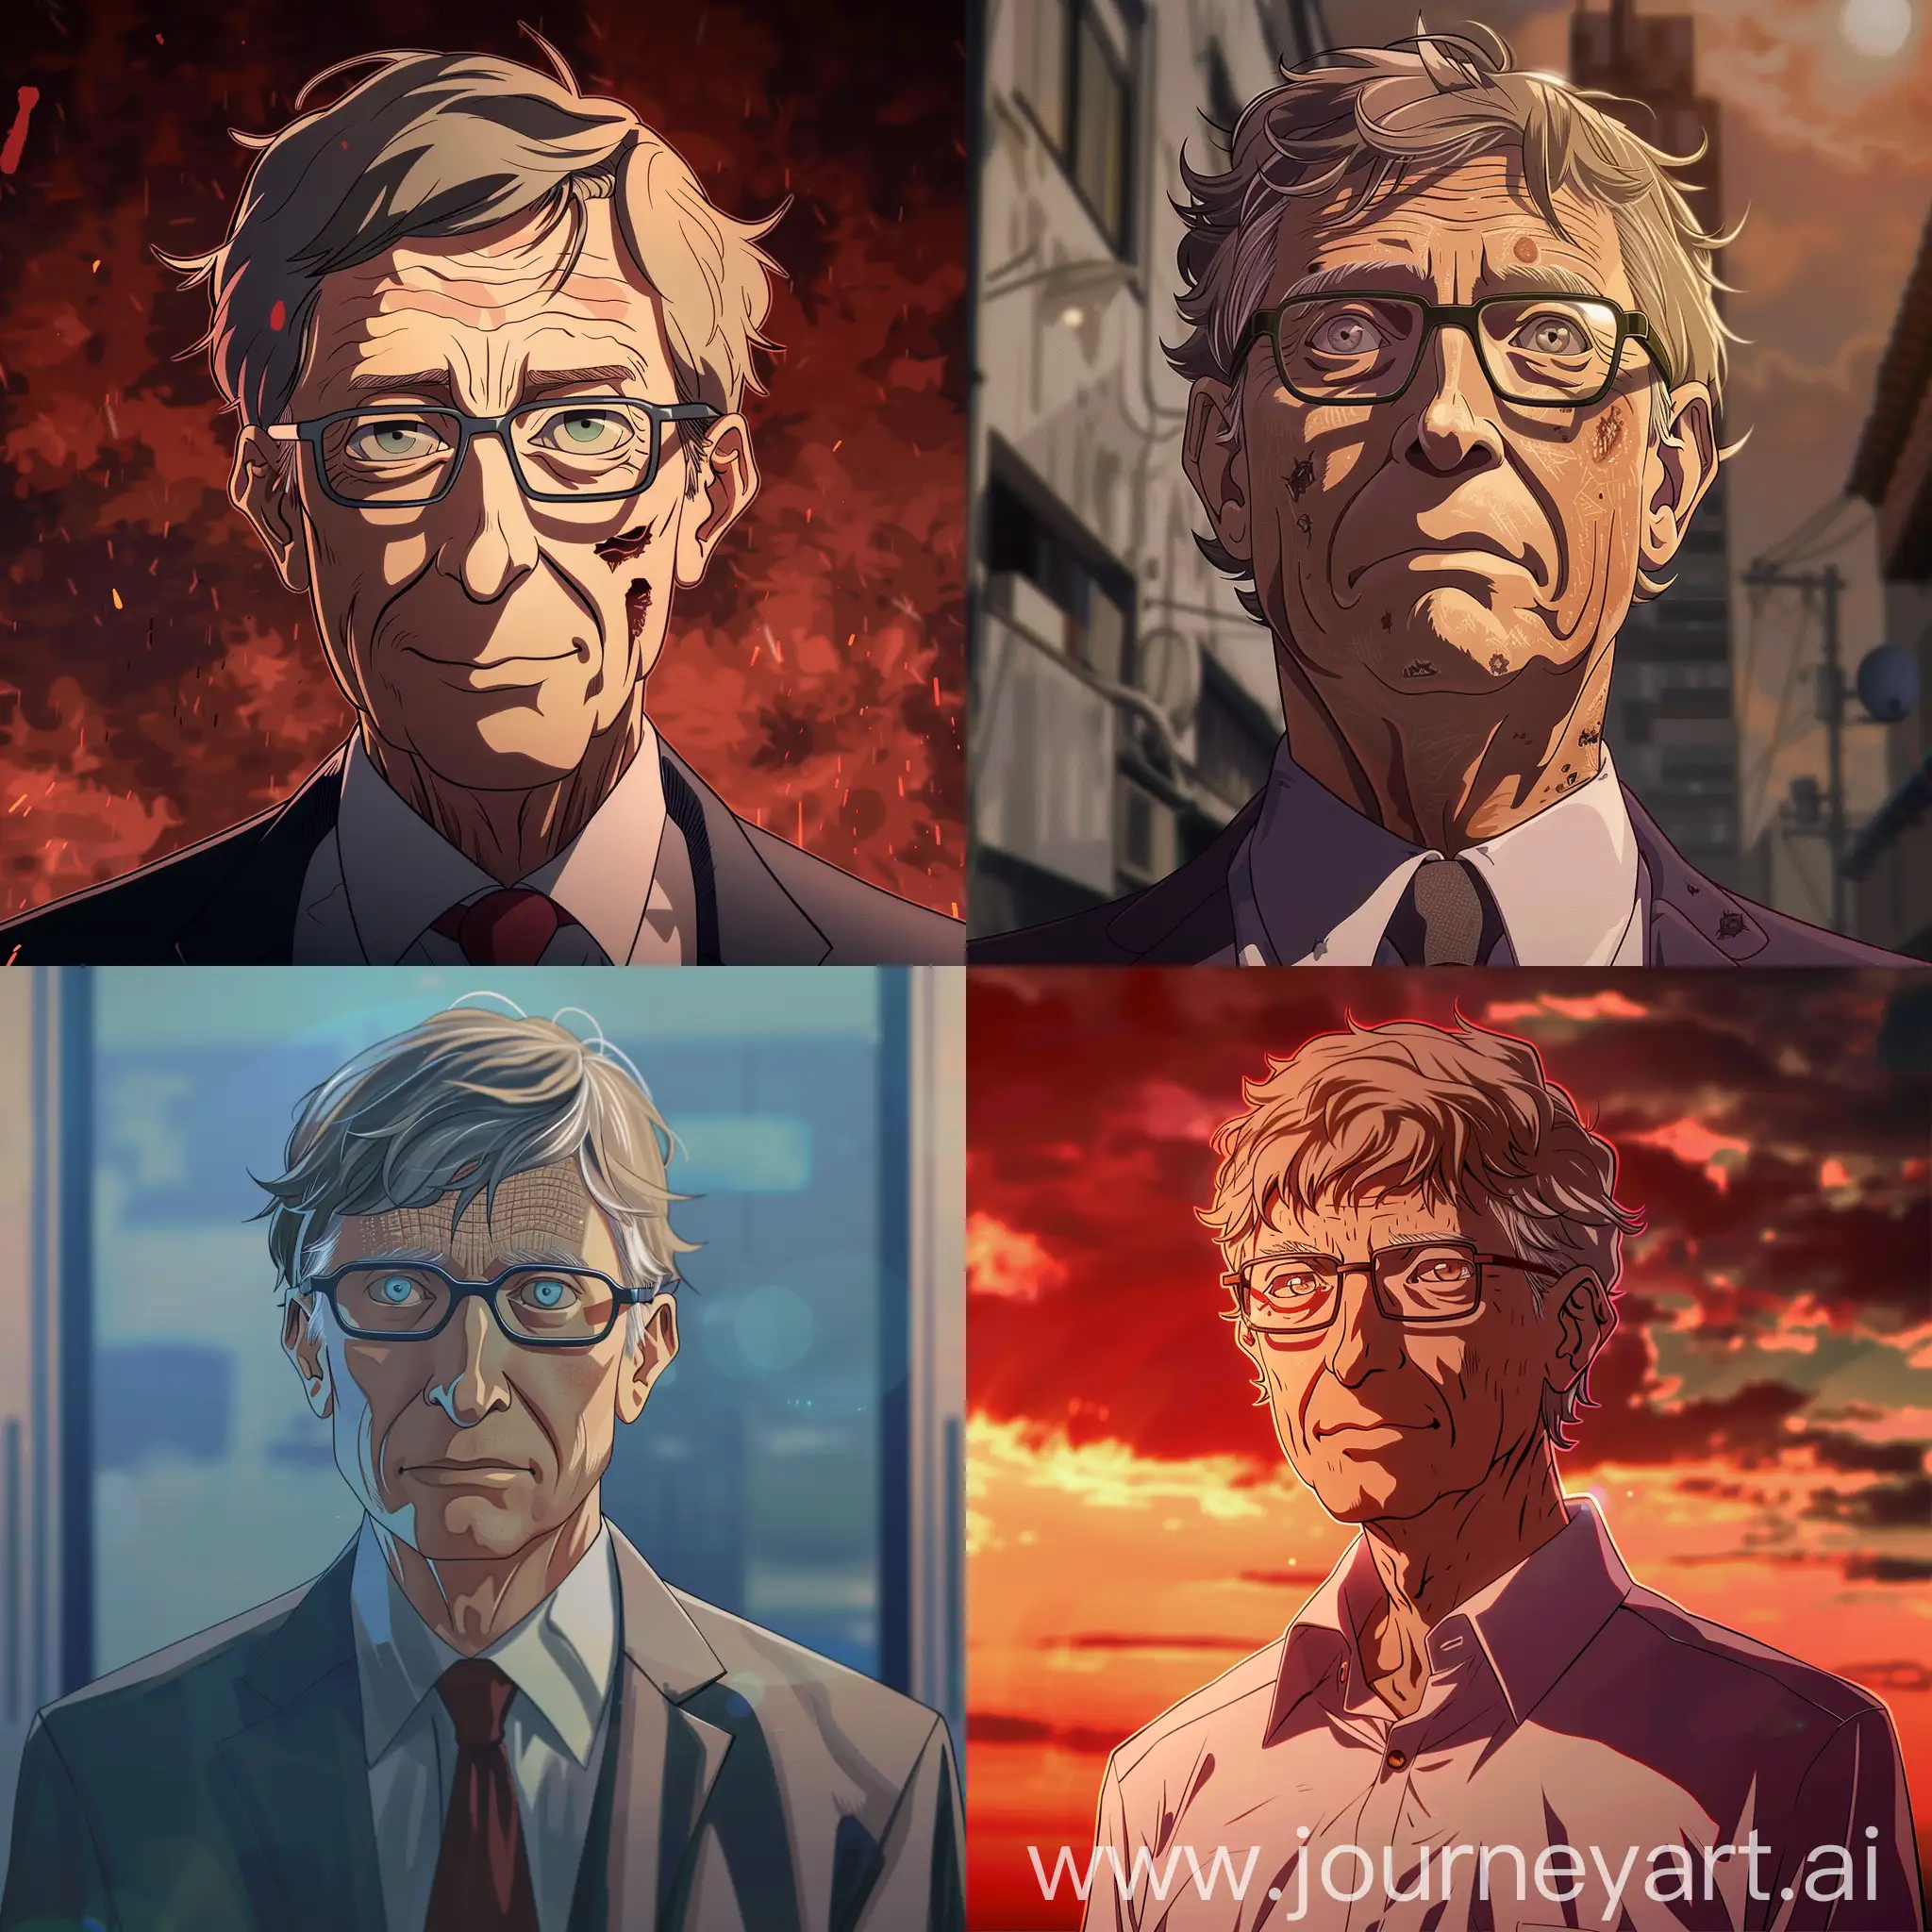 bill gates being unalived in an anime art style